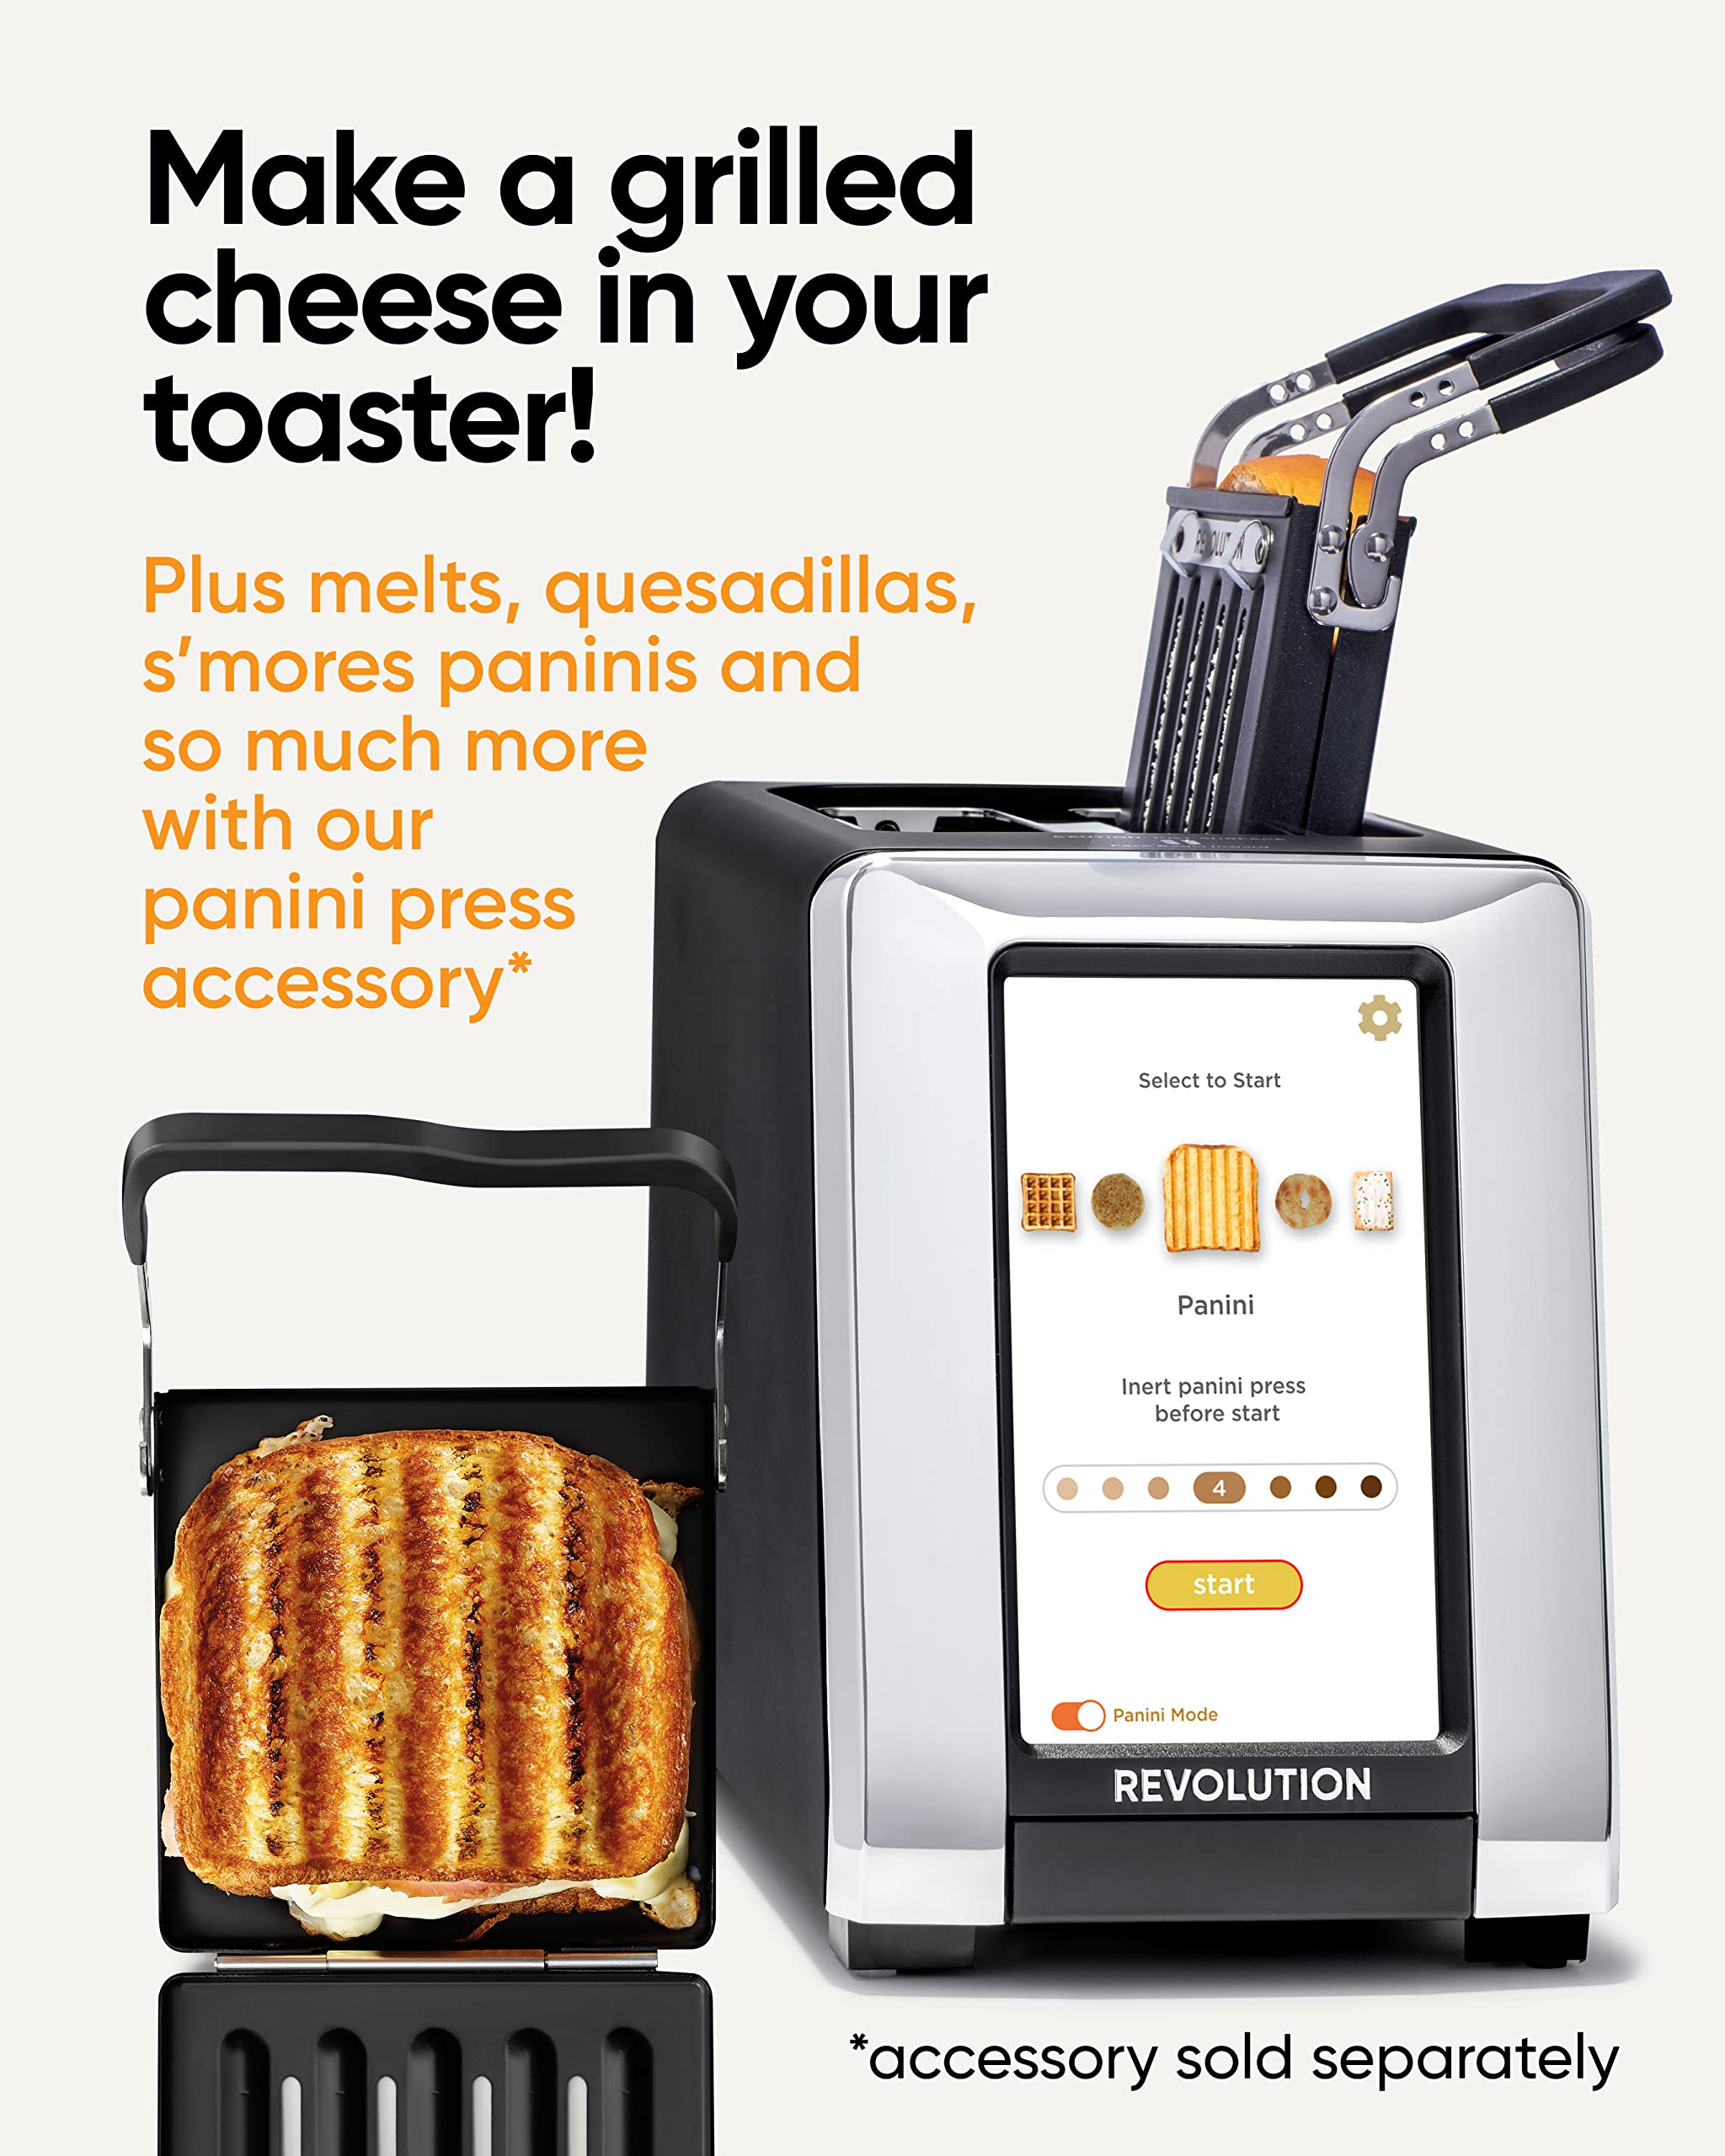 Revolution R180B High-Speed Touchscreen Toaster, 2-Slice Smart Toaster with Patented InstaGLO Technology & Panini Mode